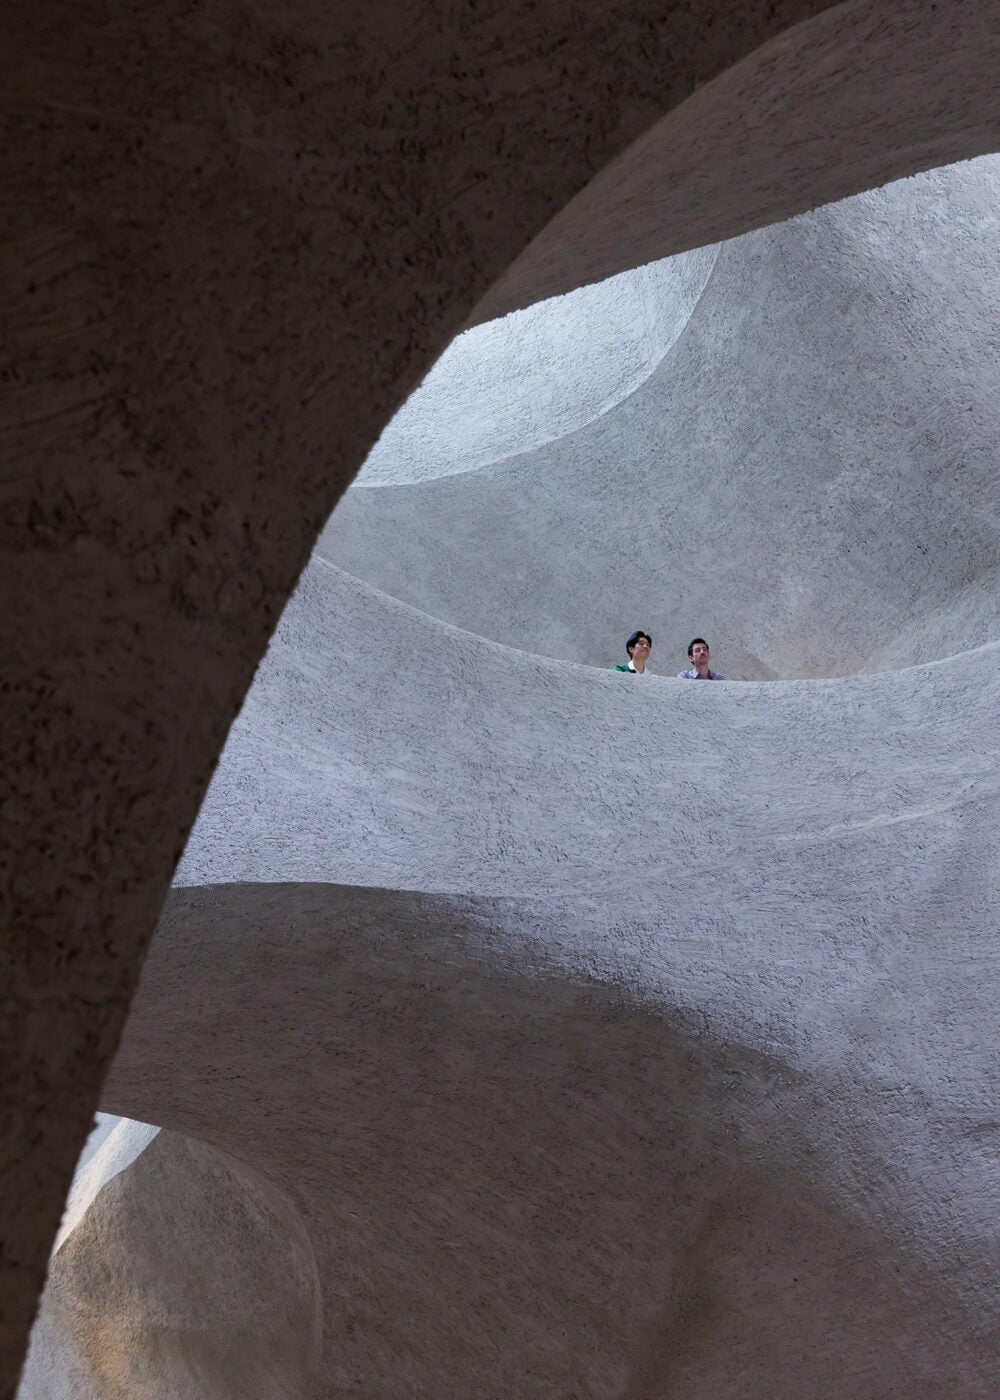 Two people look down from Gilder Center bridge as lights and shadows make upper floors appear cavernous.